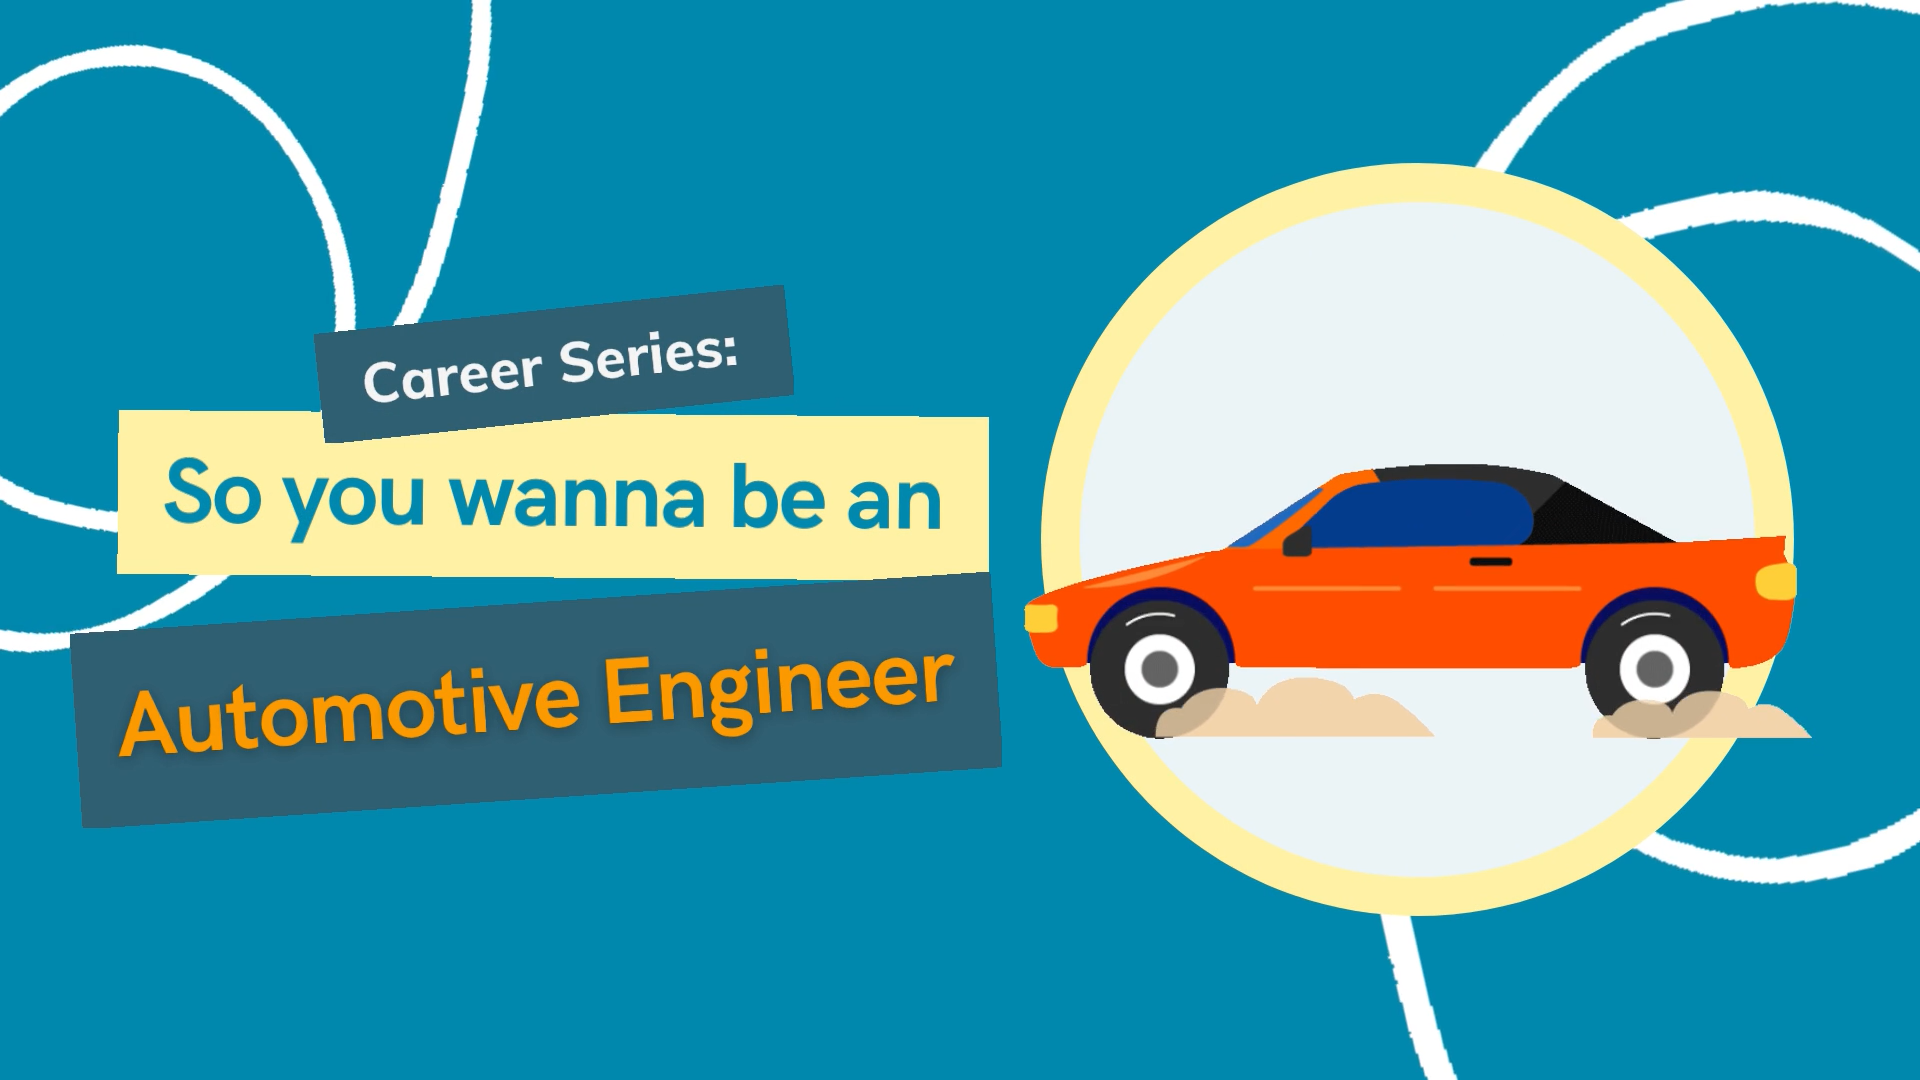 Career Series for Kids: So You Wanna Be an Automotive Engineer